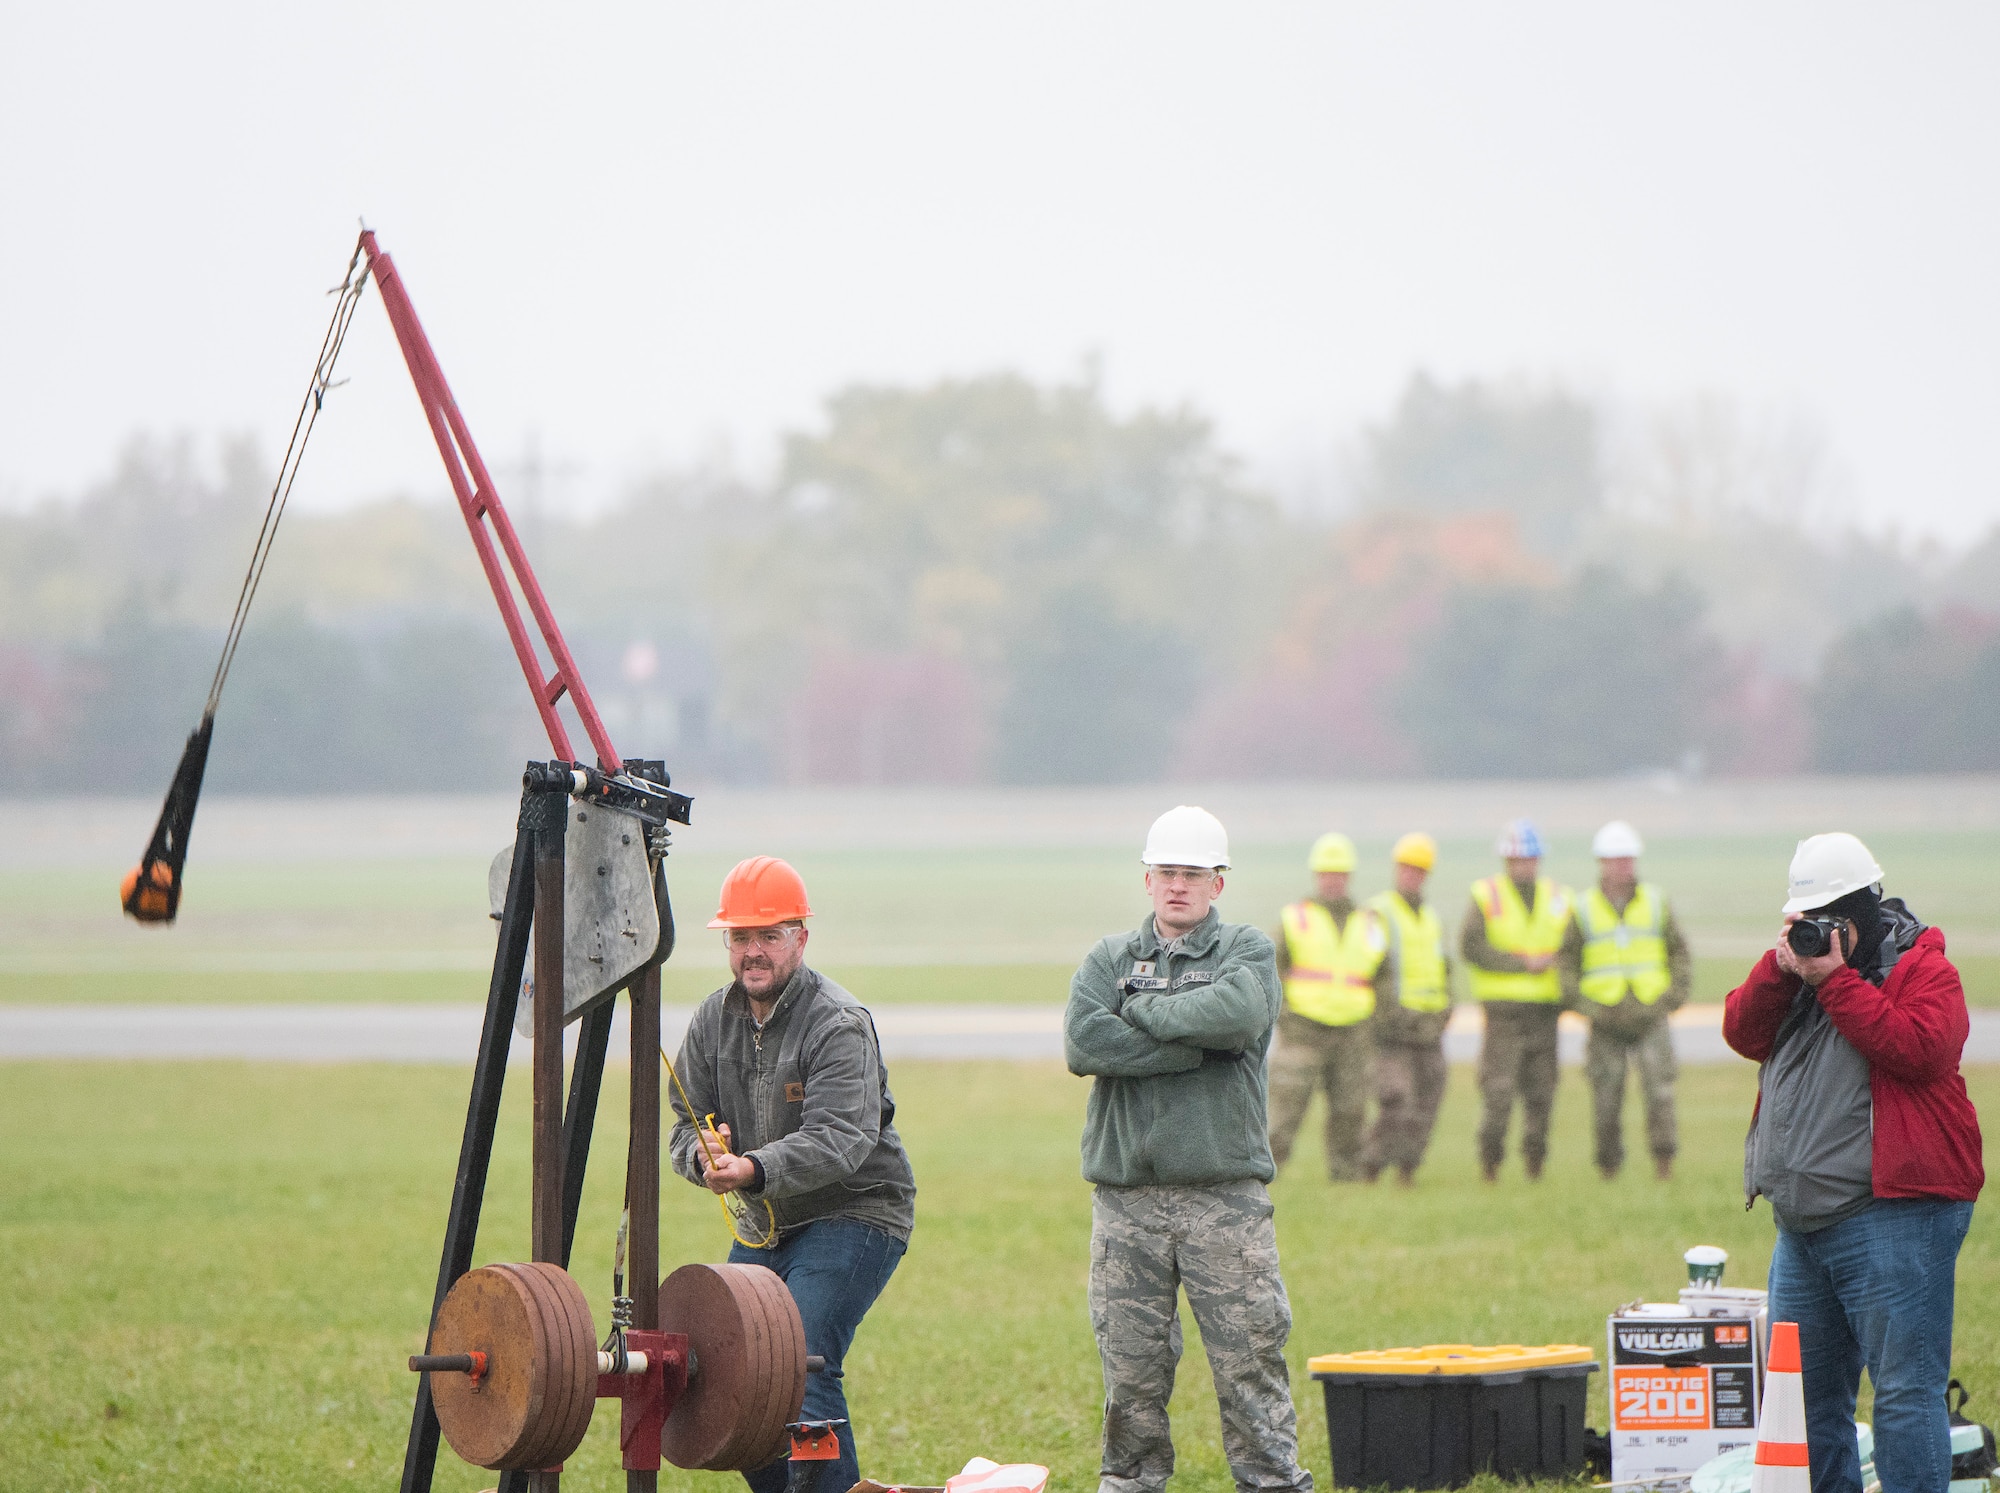 An Air Force Life Cycle Management Center’s F-15 Engineering Branch team member pulls the trigger on their trebuchet-style catapult to hurl a small pumpkin during the 14th annual Wright-Patterson Air Force Base, Ohio, pumpkin chuck Nov. 2.